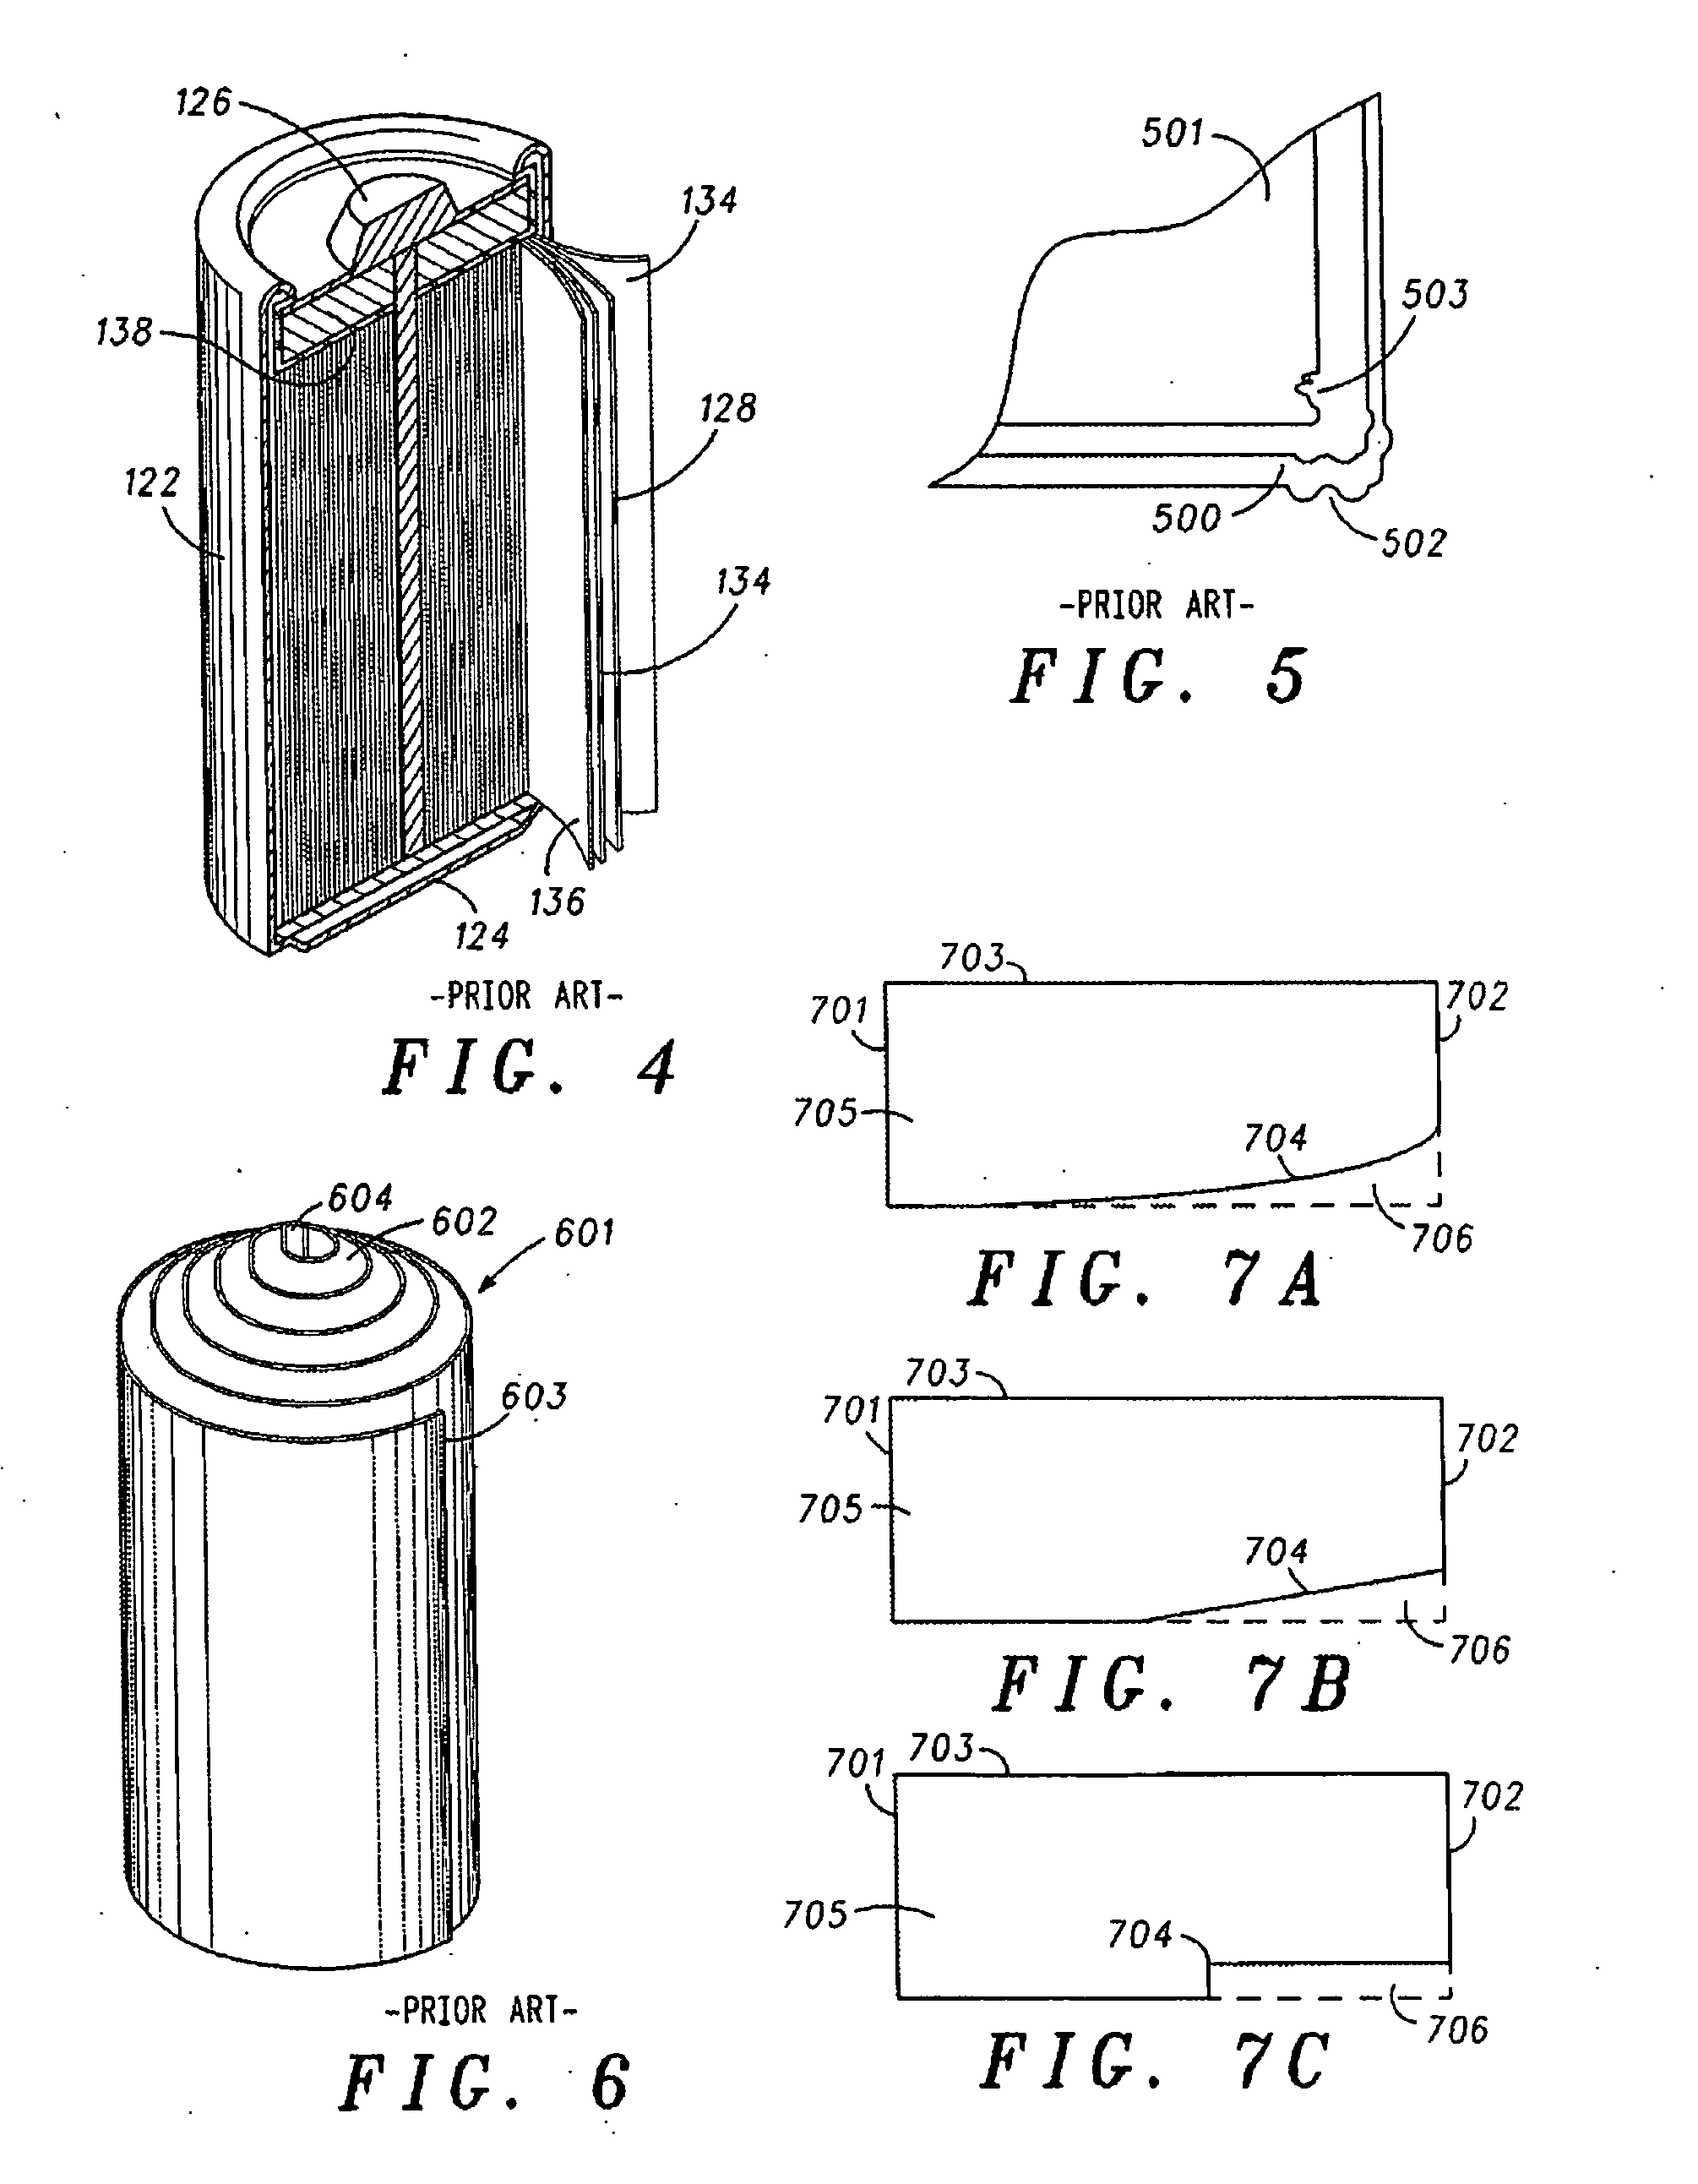 Impact resistant electrochemical cell with tapered electrode and crumple zone